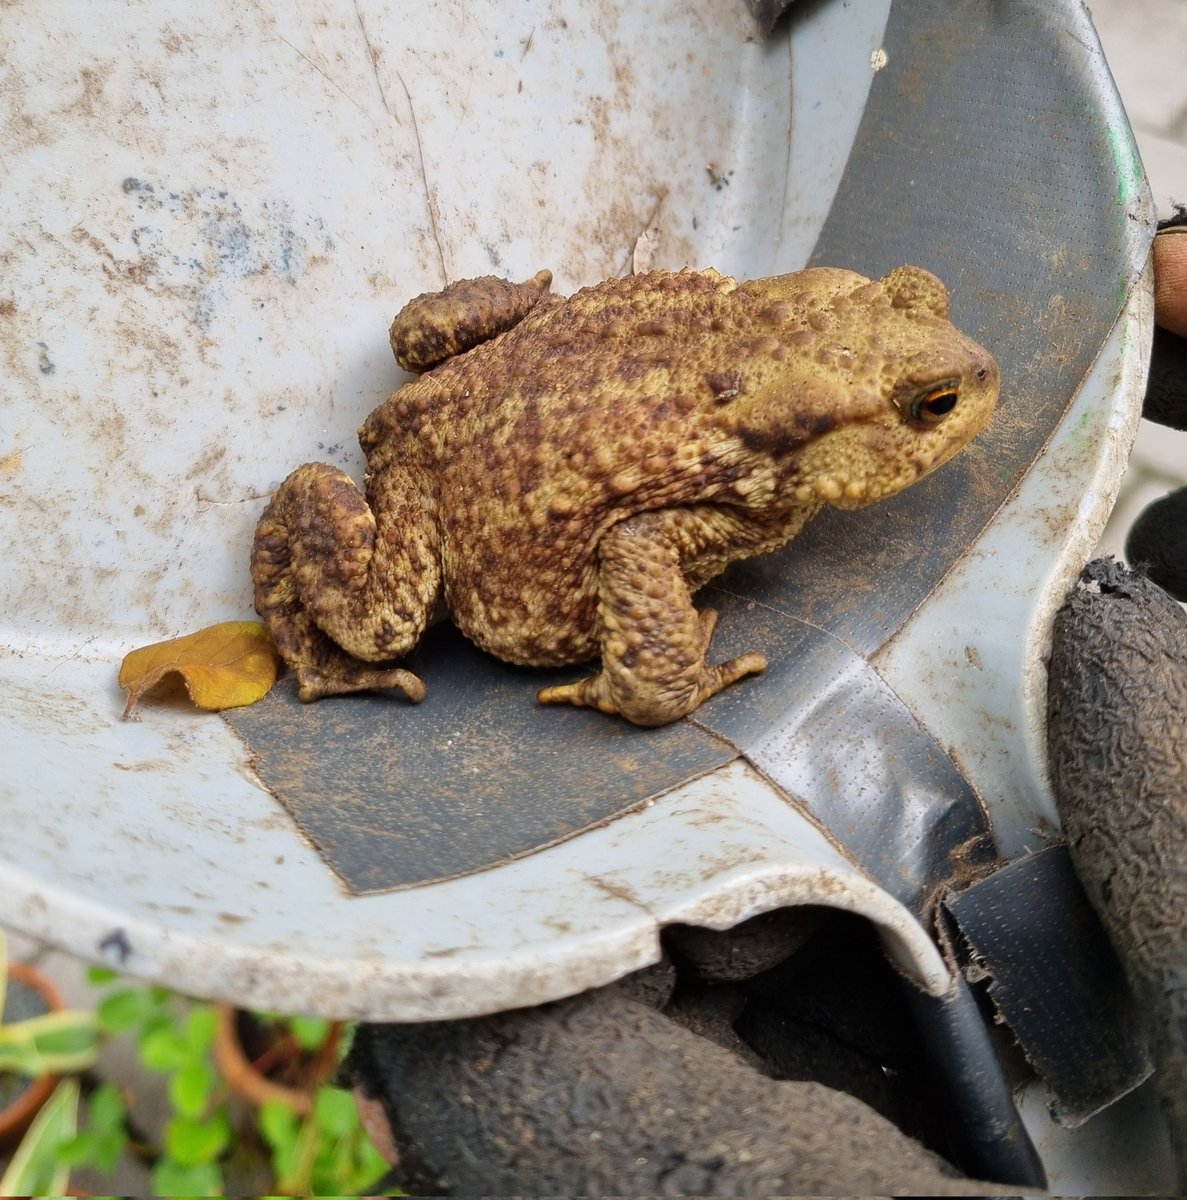 A very fat toad in the garden today, probably gorged on slugs after the recent rain.  #toads #nature #gardenponds #Britishamphibians #lovemygarden